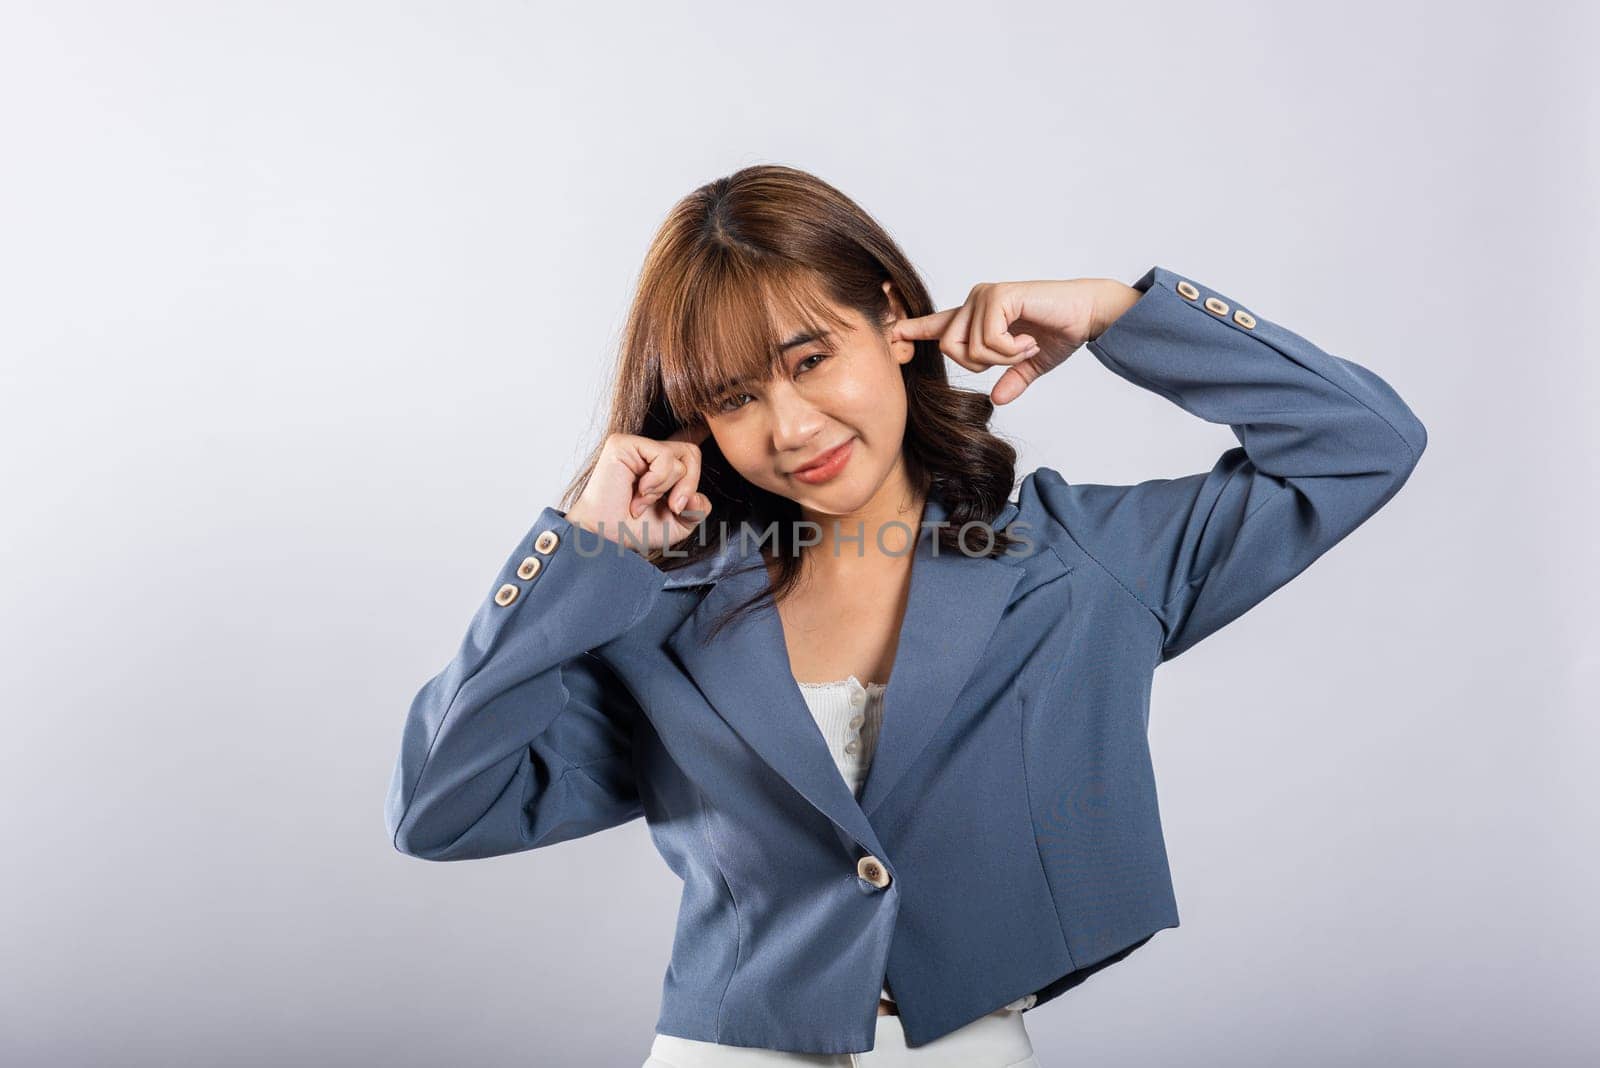 An Asian woman is captured in a studio shot, conveying her stress and discomfort caused by loud noise. She covers her ears and closes her eyes tightly, isolated on a white background.